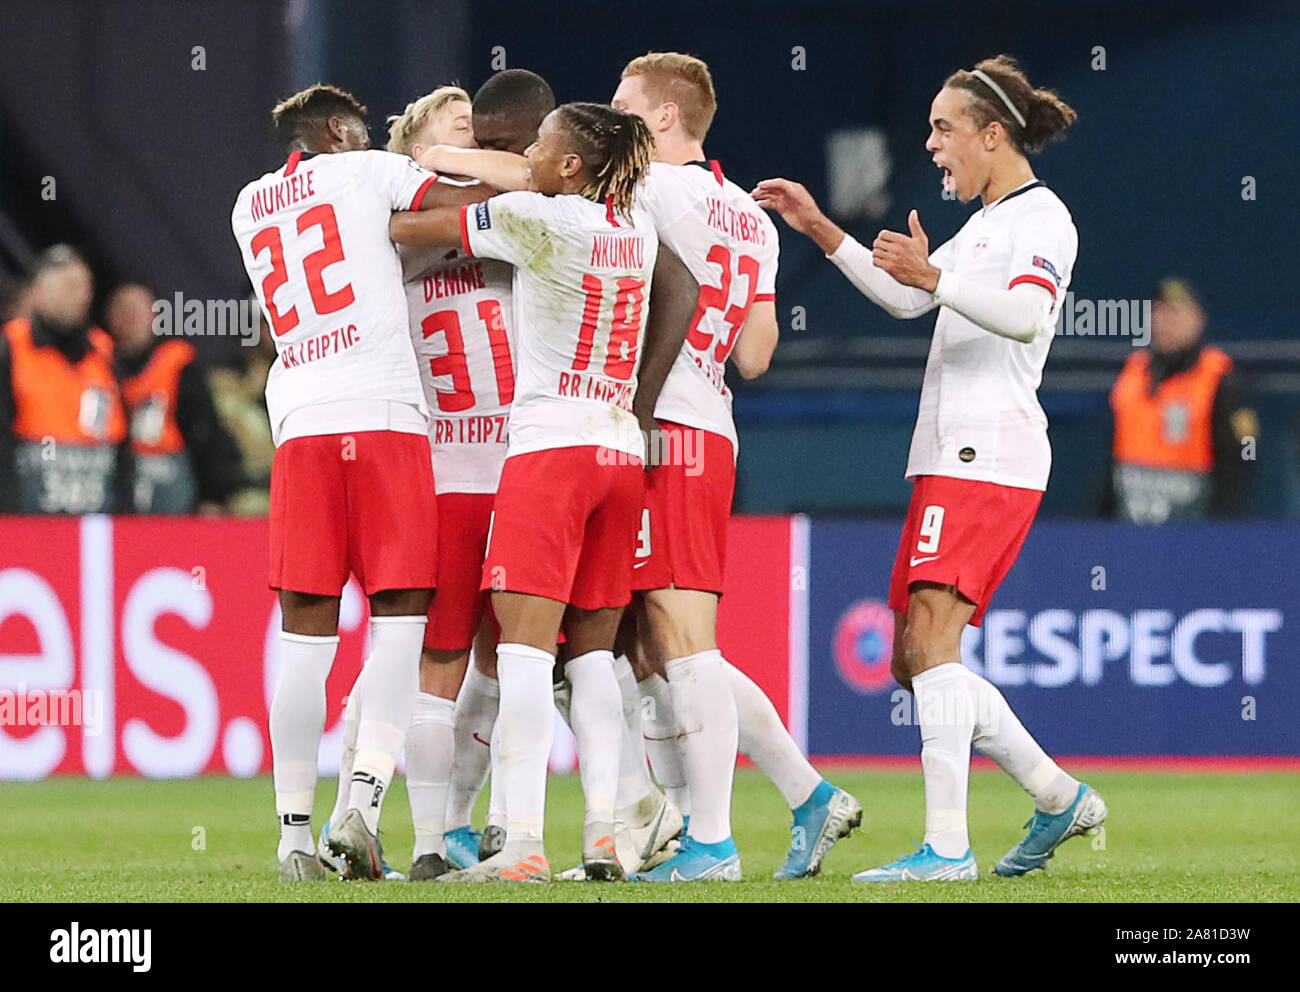 ST PETERSBURG, RUSSIA – NOVEMBER 4, 2019: RB Leipzig's Nordi Mukiele,  Christopher Nkuknu, Marcel Halstenberg, and Yussuf Poulsen (L-R) celebrate  a goal in a 2019-20 UEFA Champions League Group G football match